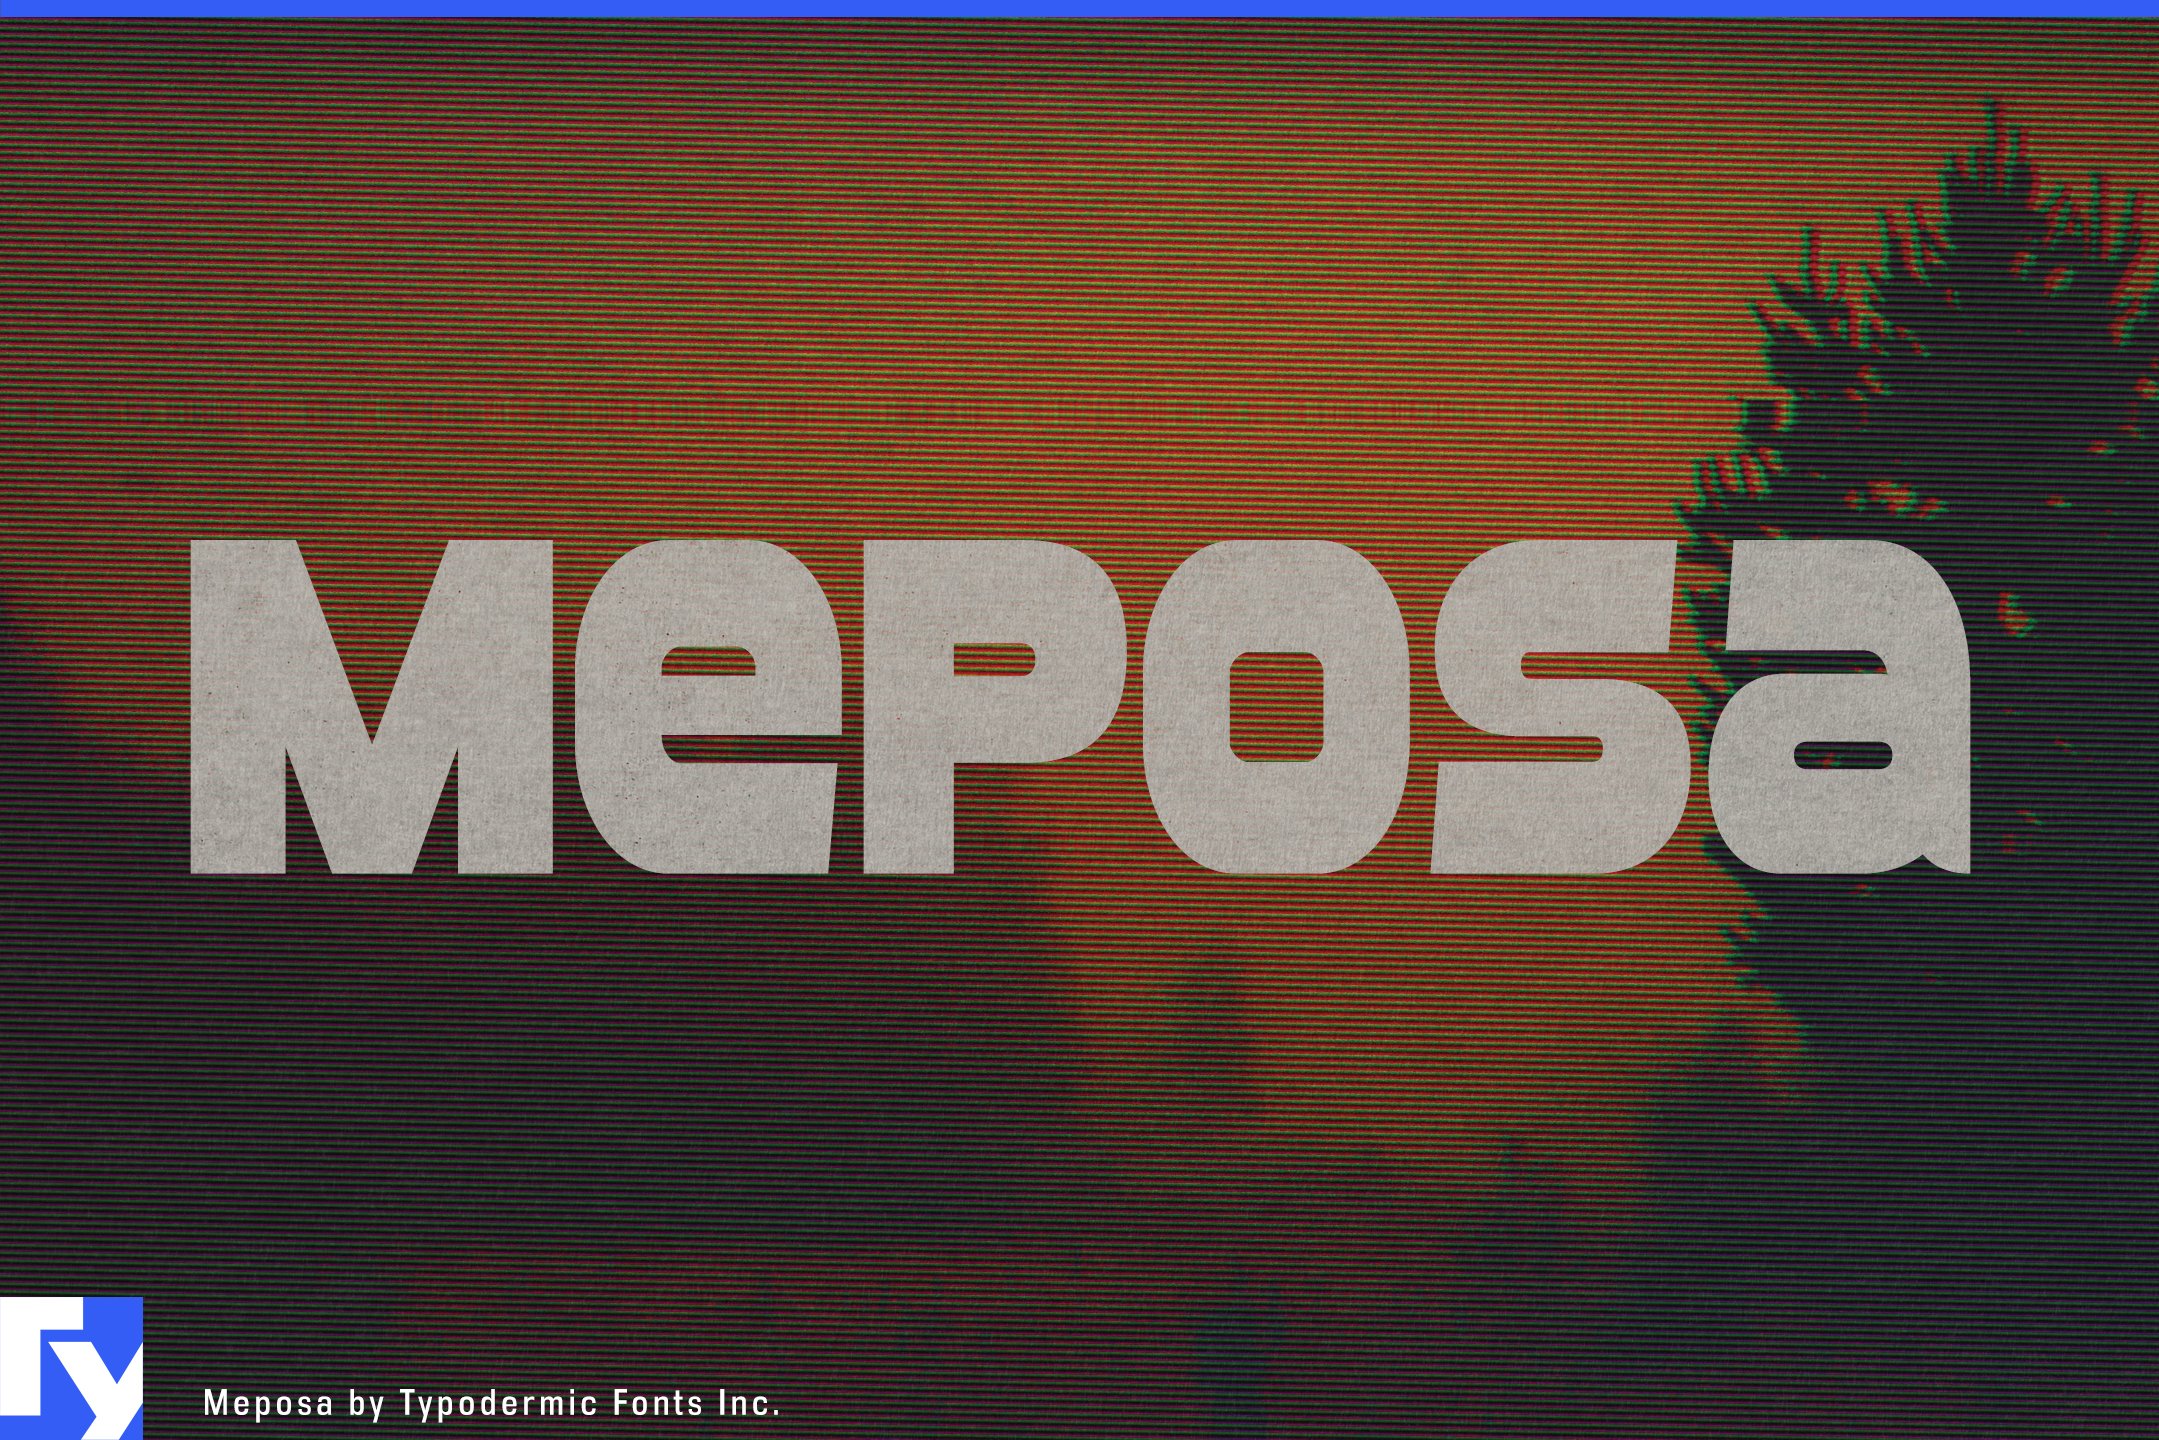 Meposa cover image.